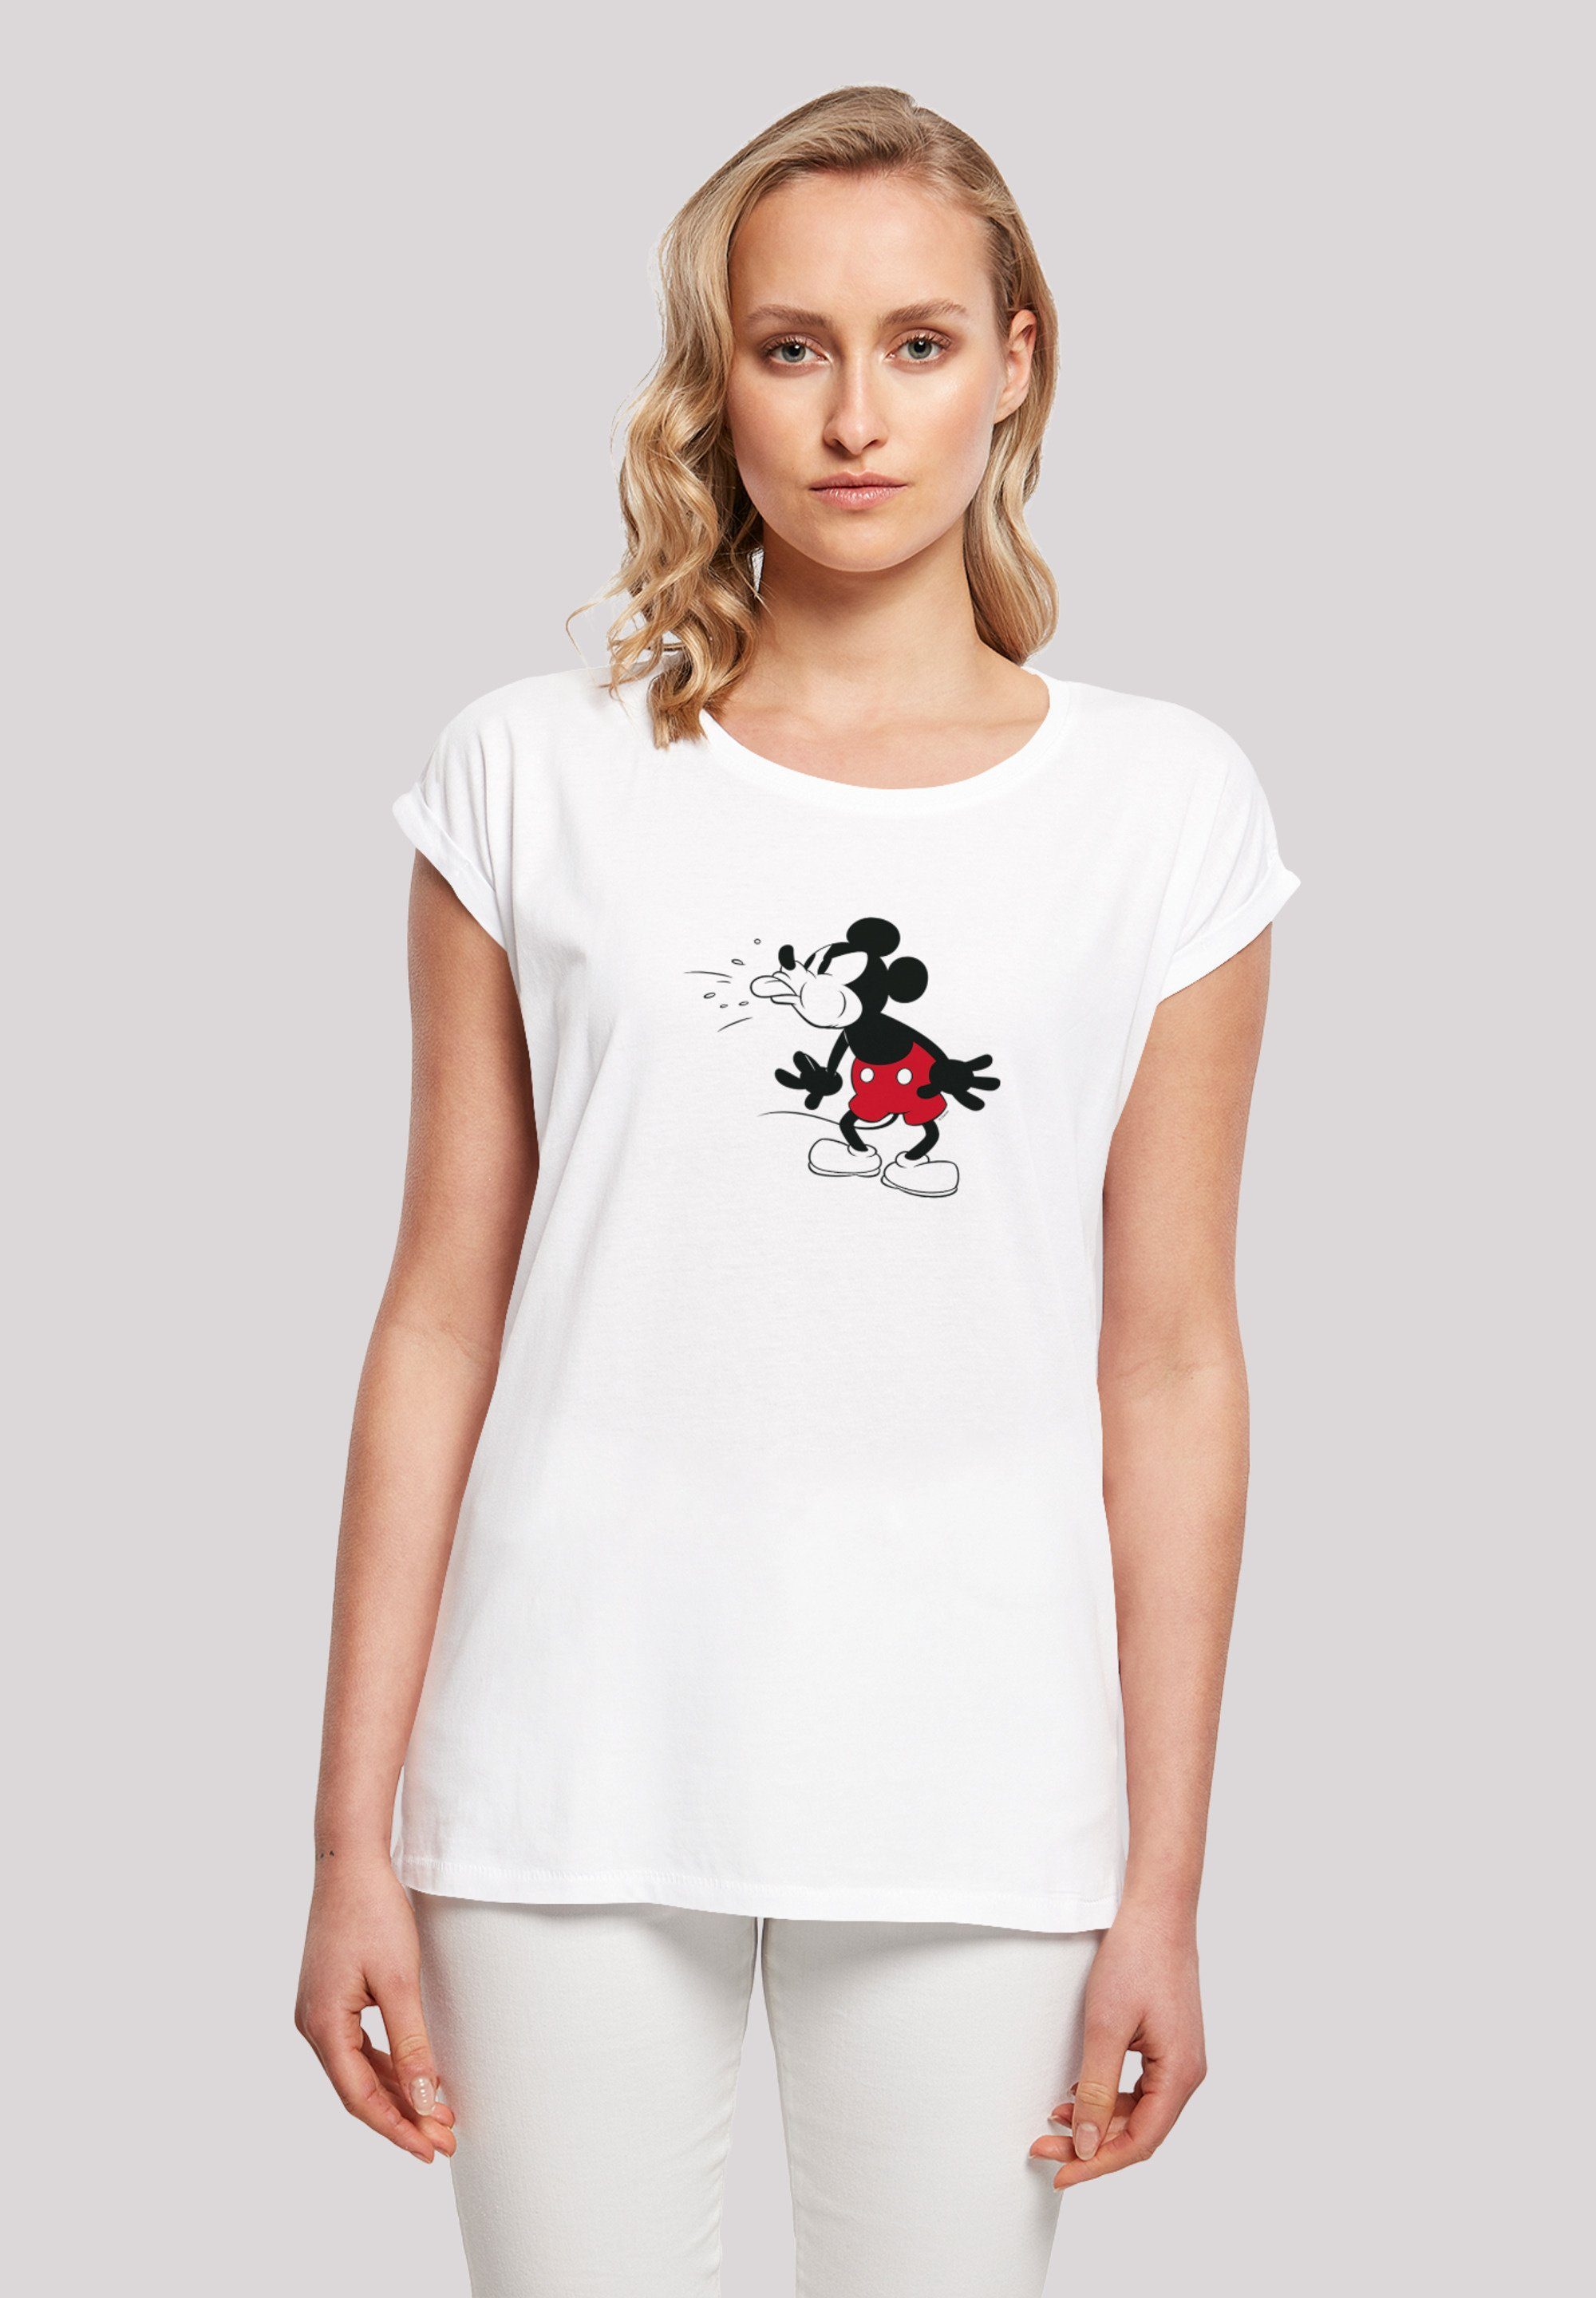 Classic Maus Mouse Vintage Disney T-Shirt F4NT4STIC Print Micky Mickey